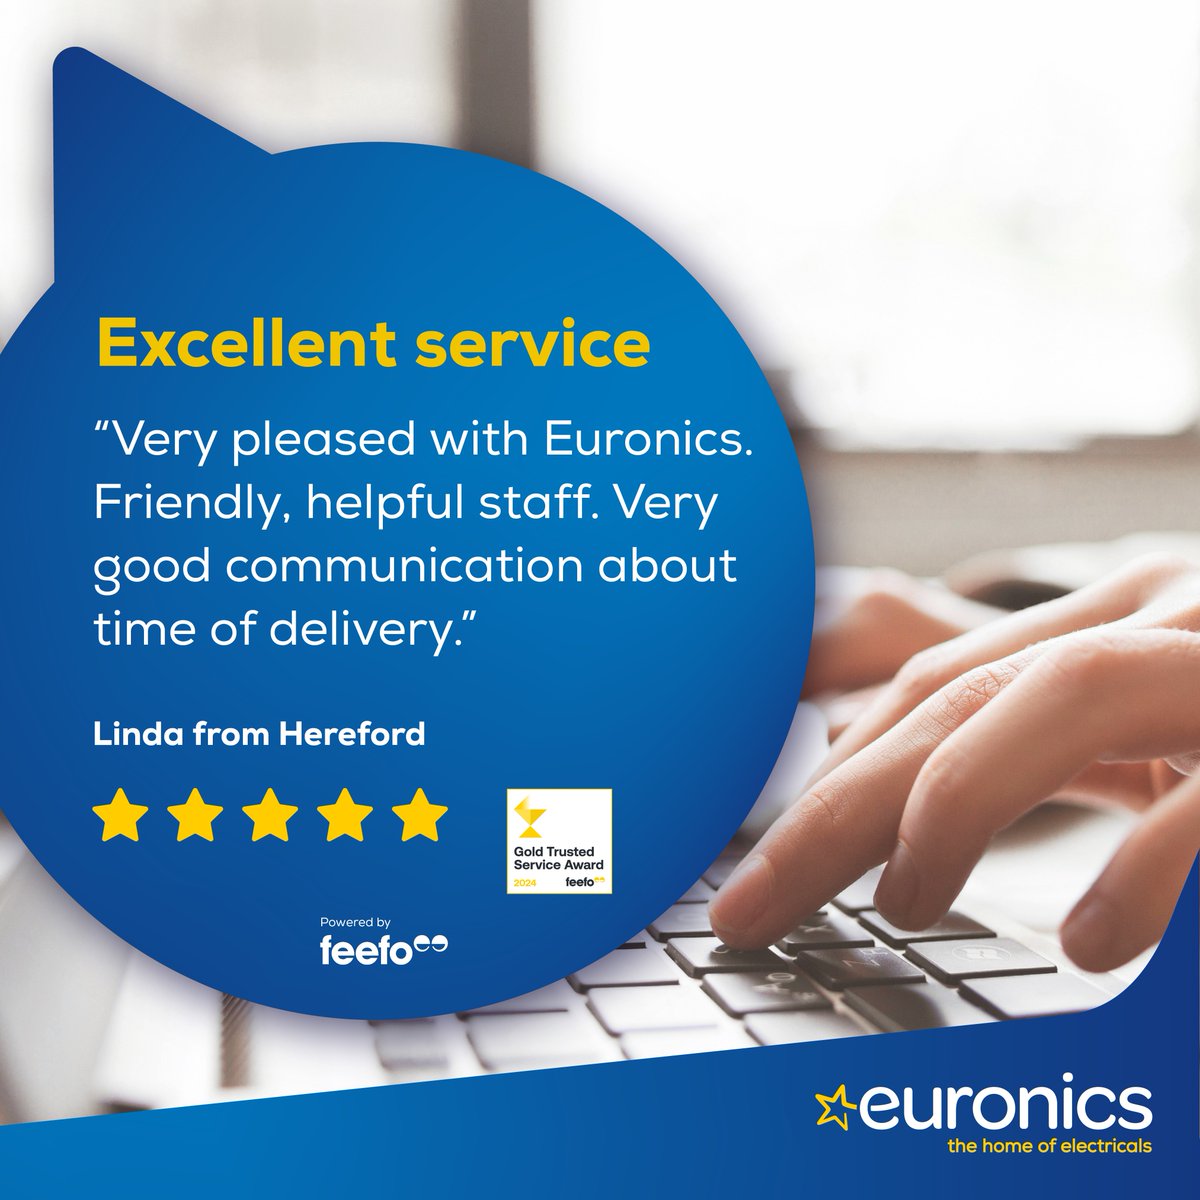 A Which? award winner combining the personal service of local experts with the reassurances of an established brand, why not trust us with your next appliance? Our Spring Offers are still on, but hurry, they end on 30th April. euronics.la/m/Euronics #TheHomeofElectricals